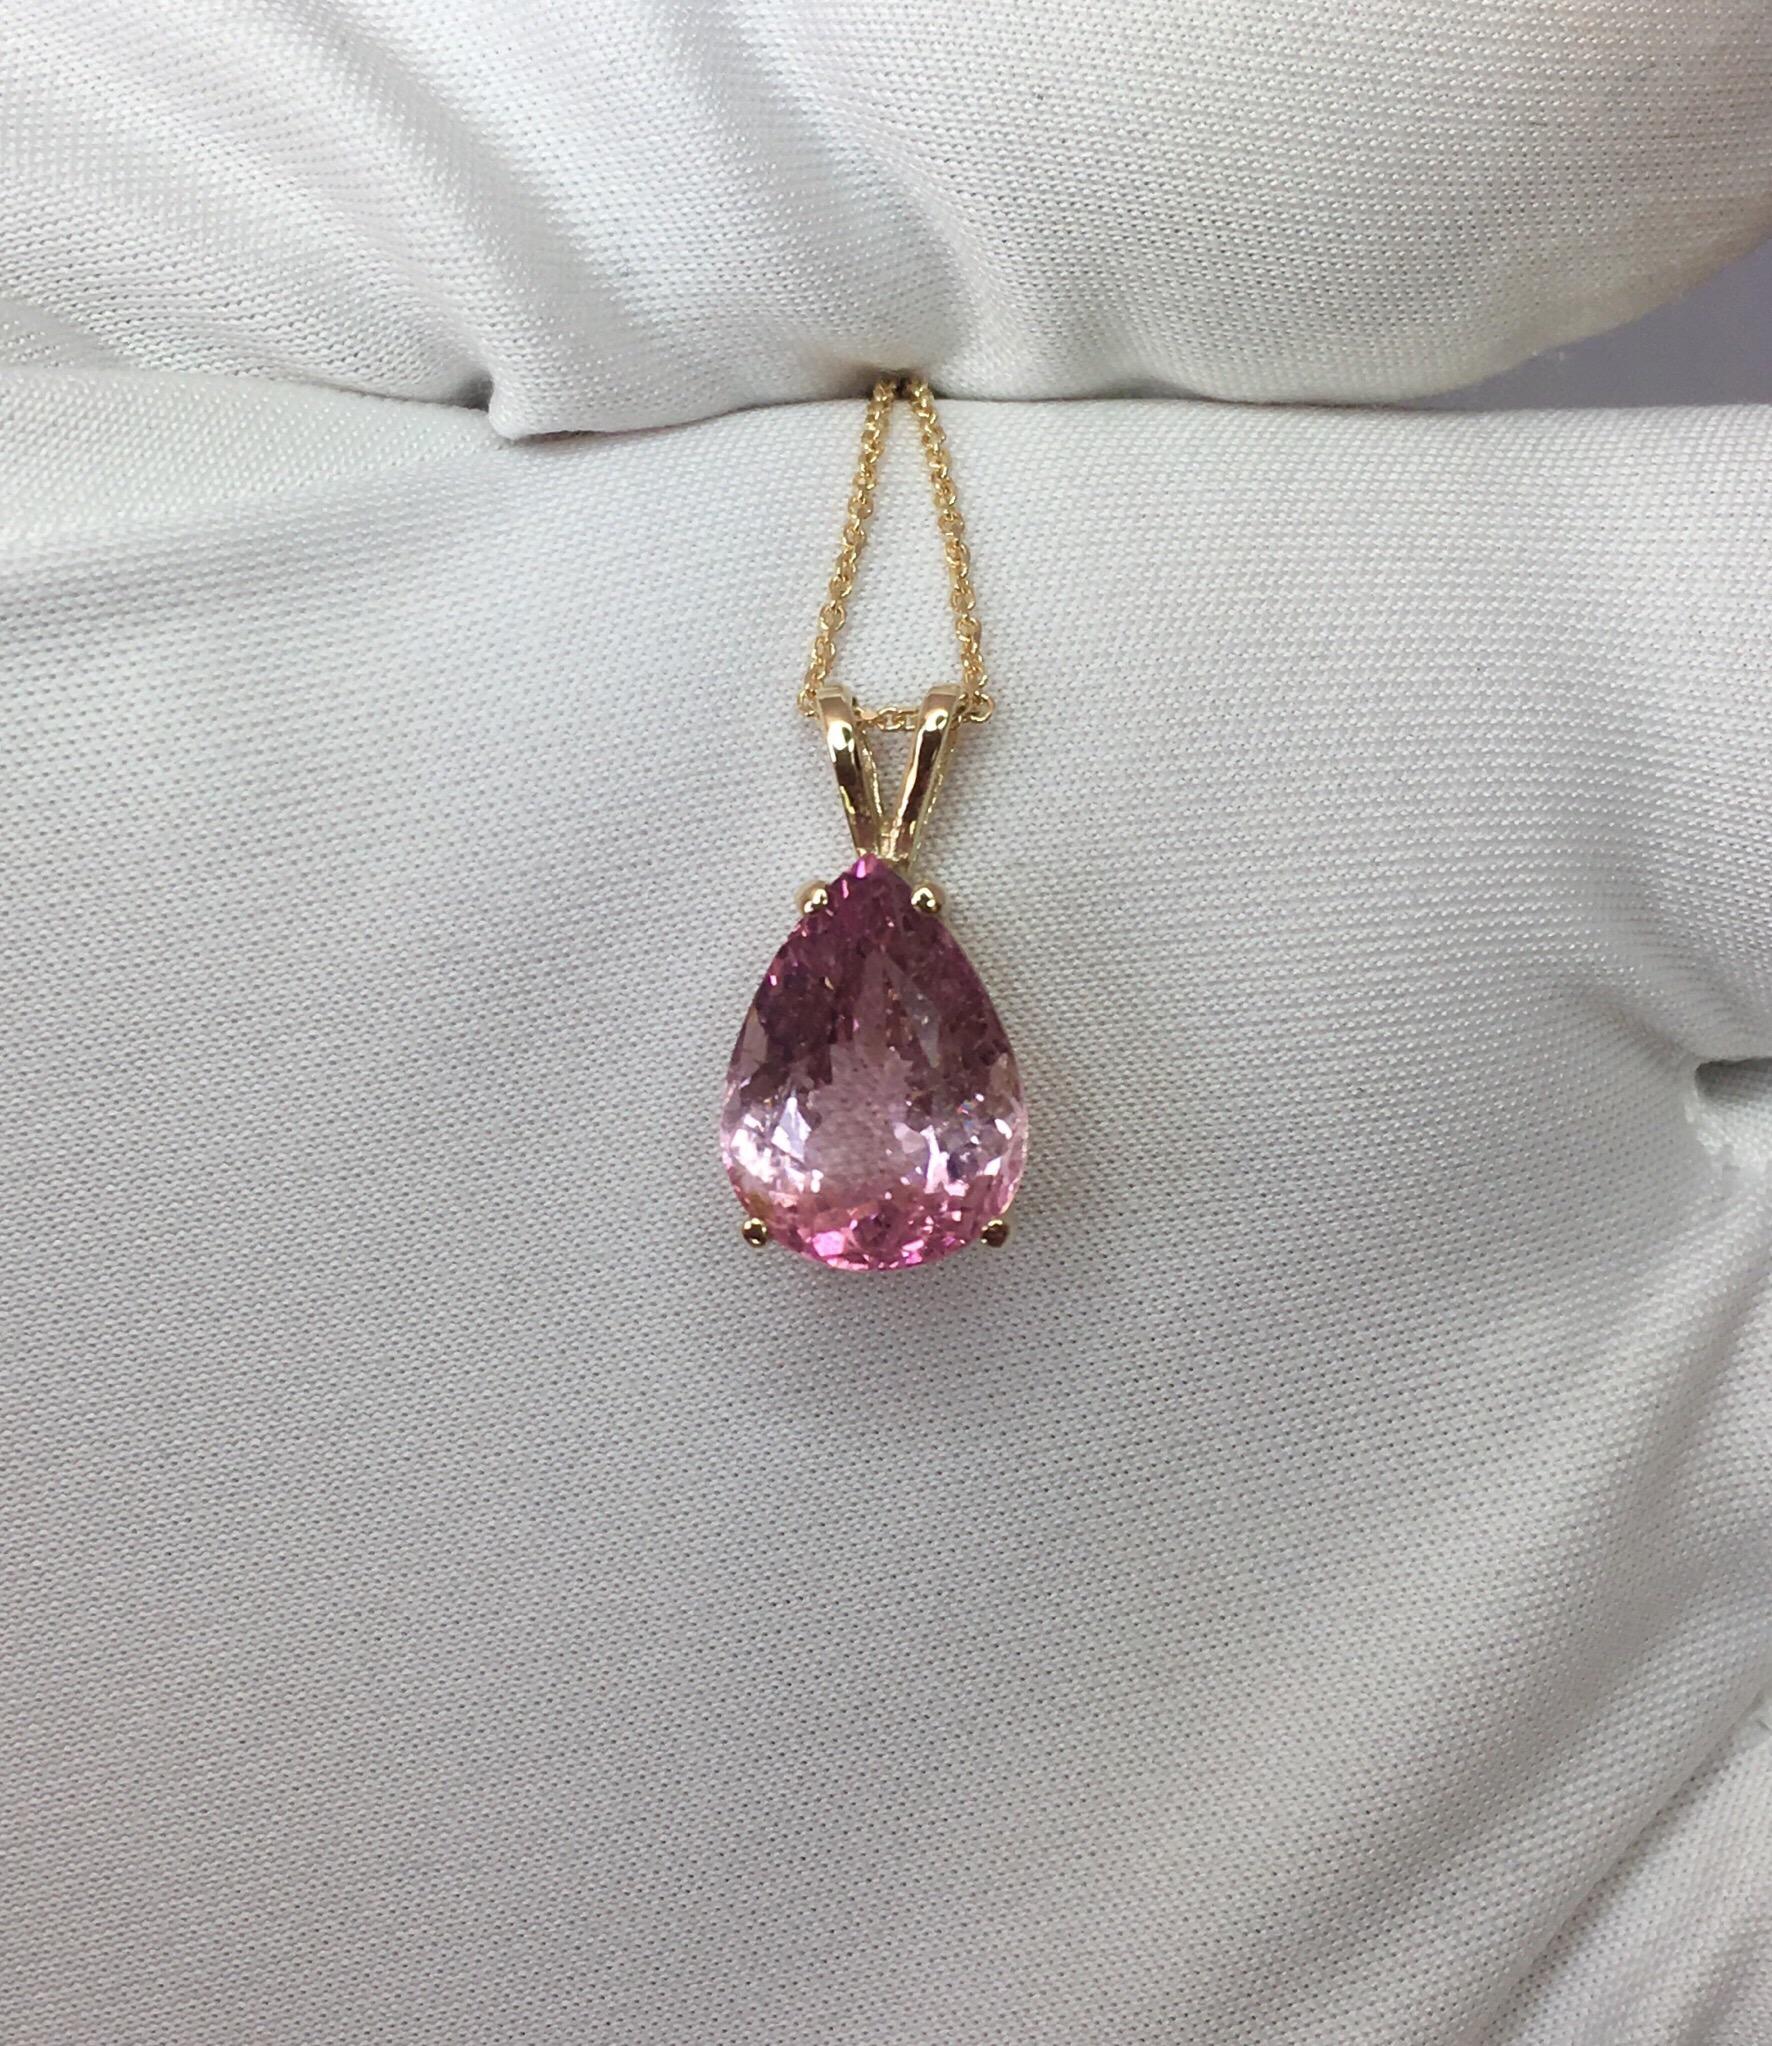 Beautiful large natural 4.17 carat bright pink tourmaline set in a fine 14k yellow gold solitaire pendant.

Stunning tourmaline with a bright pink colour and good clarity, some inclusions when looking closely, but still a clean stone.

It also has